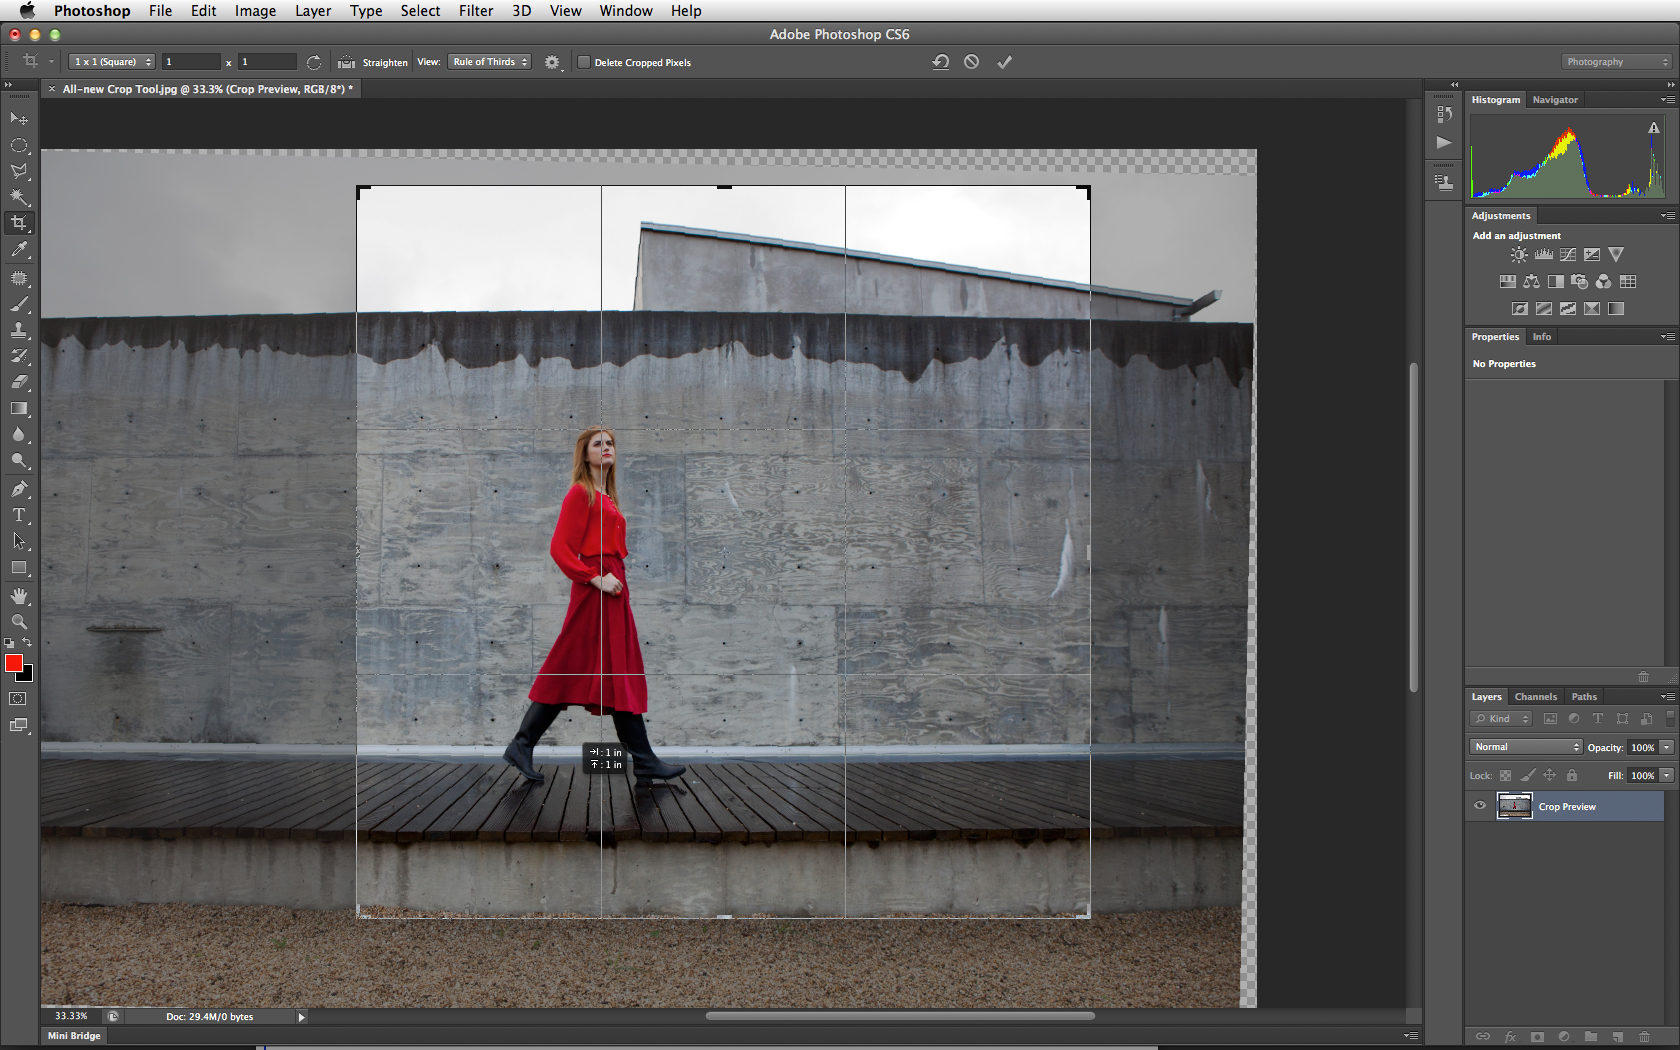 Adobe Photoshop CS6 and CS6 Extended ramp up speed and features | ZDNET